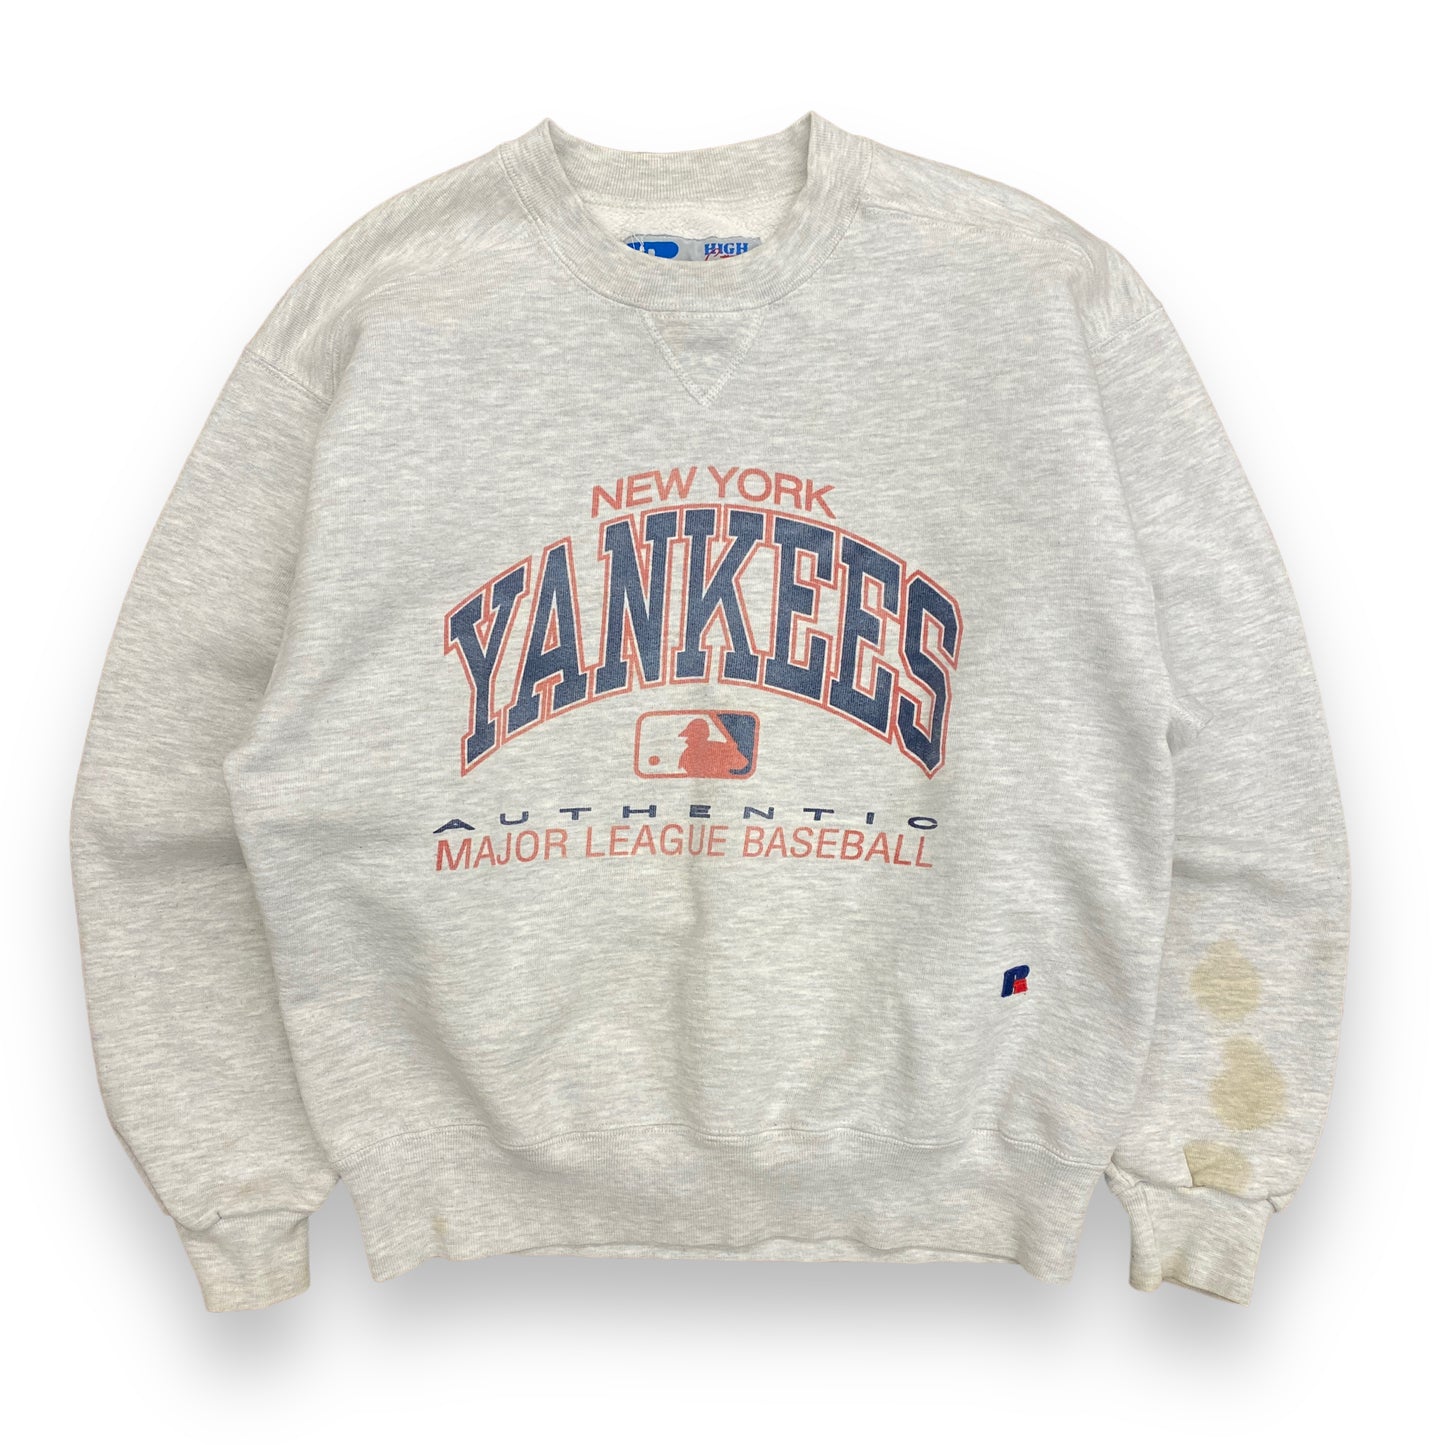 1990s Russell Athletic New York Yankees Sweatshirt - Size Medium (Tagged Youth XXL)